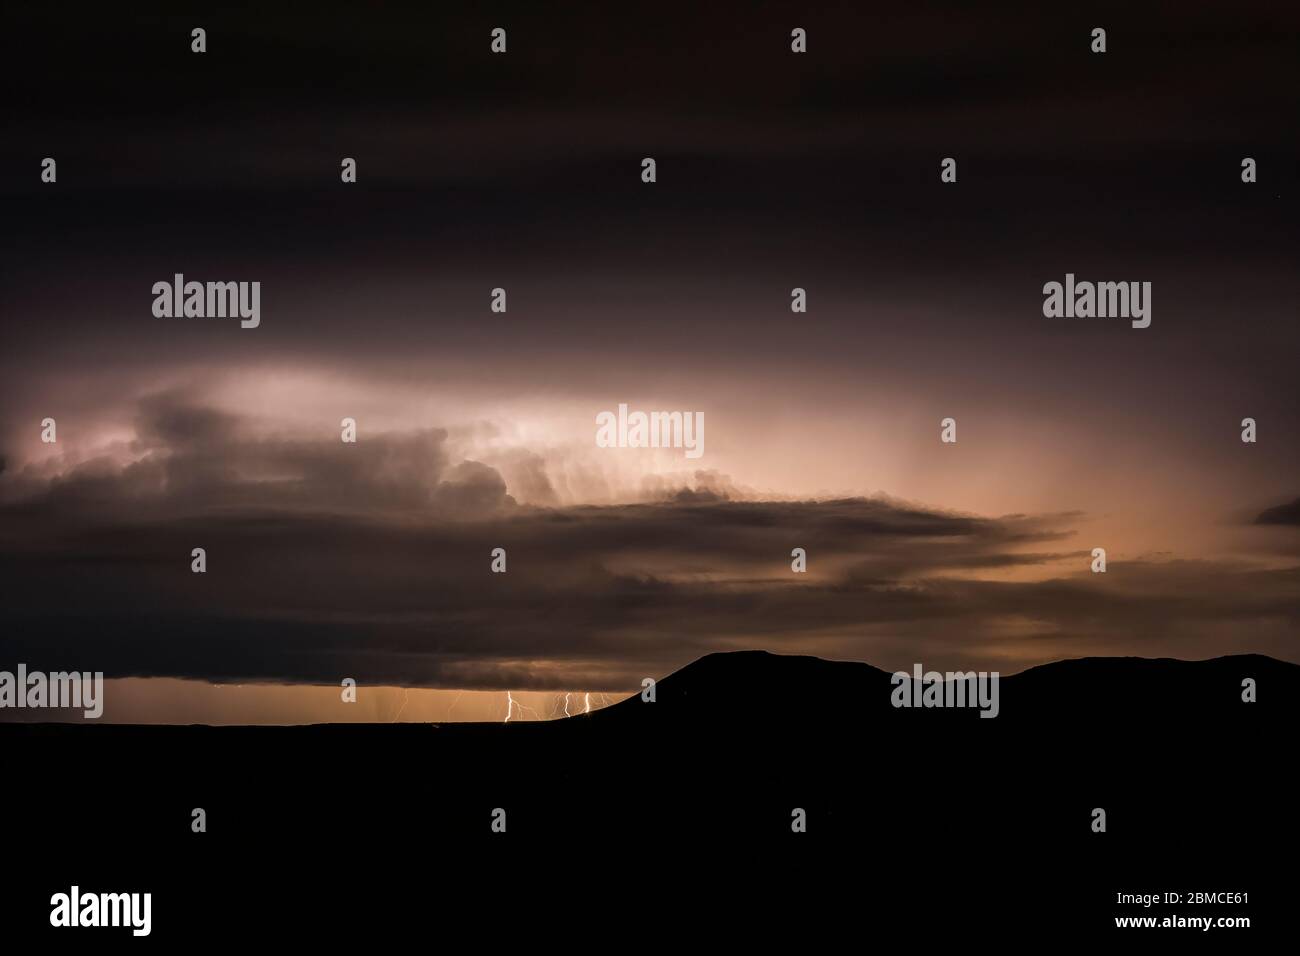 Intense nighttime thunderstorm with cloud-to-ground lightning over the Mimbres Valley and surrounding mountains, viewed from City of Rocks State Park, Stock Photo